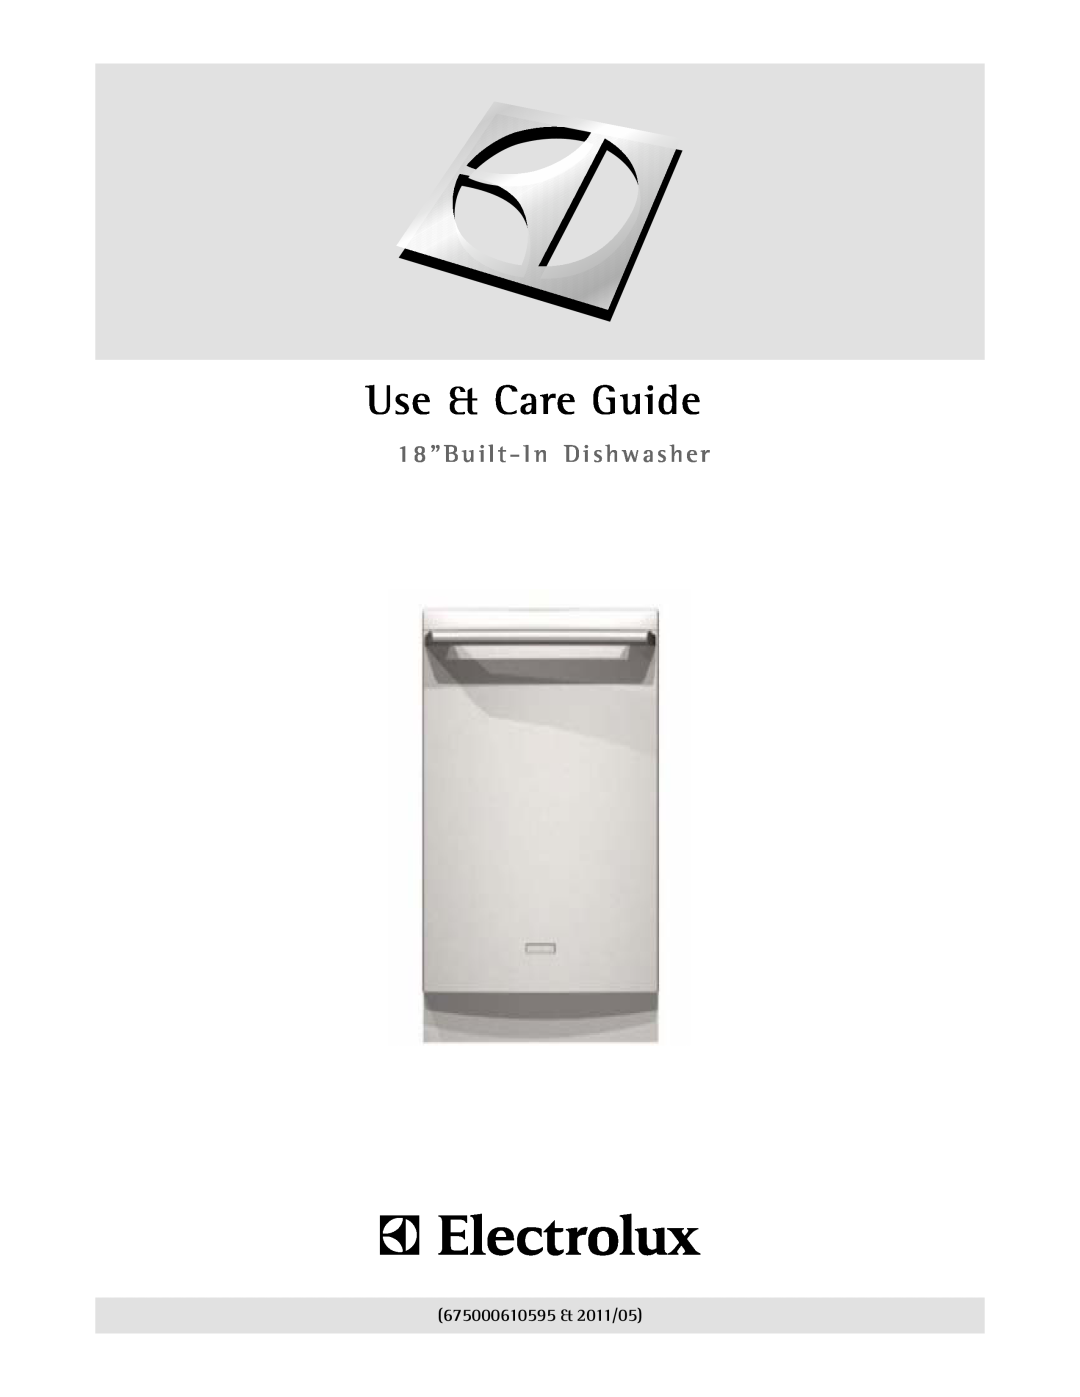 Electrolux 2001/05, 6.75E+11 manual Use & Care Guide, 18”Built - In Dishwasher, 675000610595 & 2011/05 